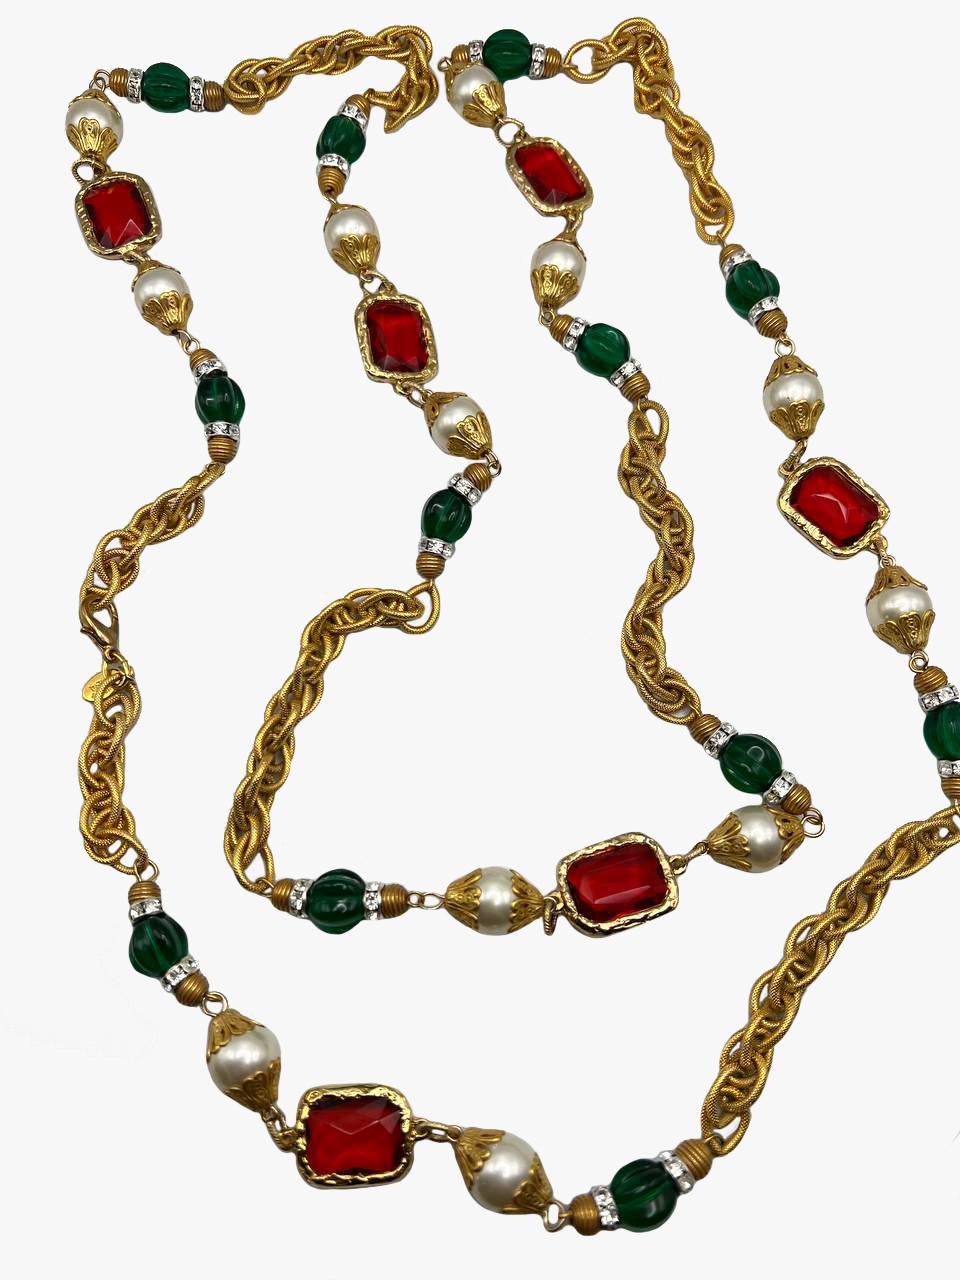 Lawrence VRBA stunning  vintage gold plated necklace with ruby and emerald colored inserts, faux pearl beads and rhinestones

Marked

Length – 137 cm / 54”, can be wound in two or three tiers

Condition – very good

........Additional information